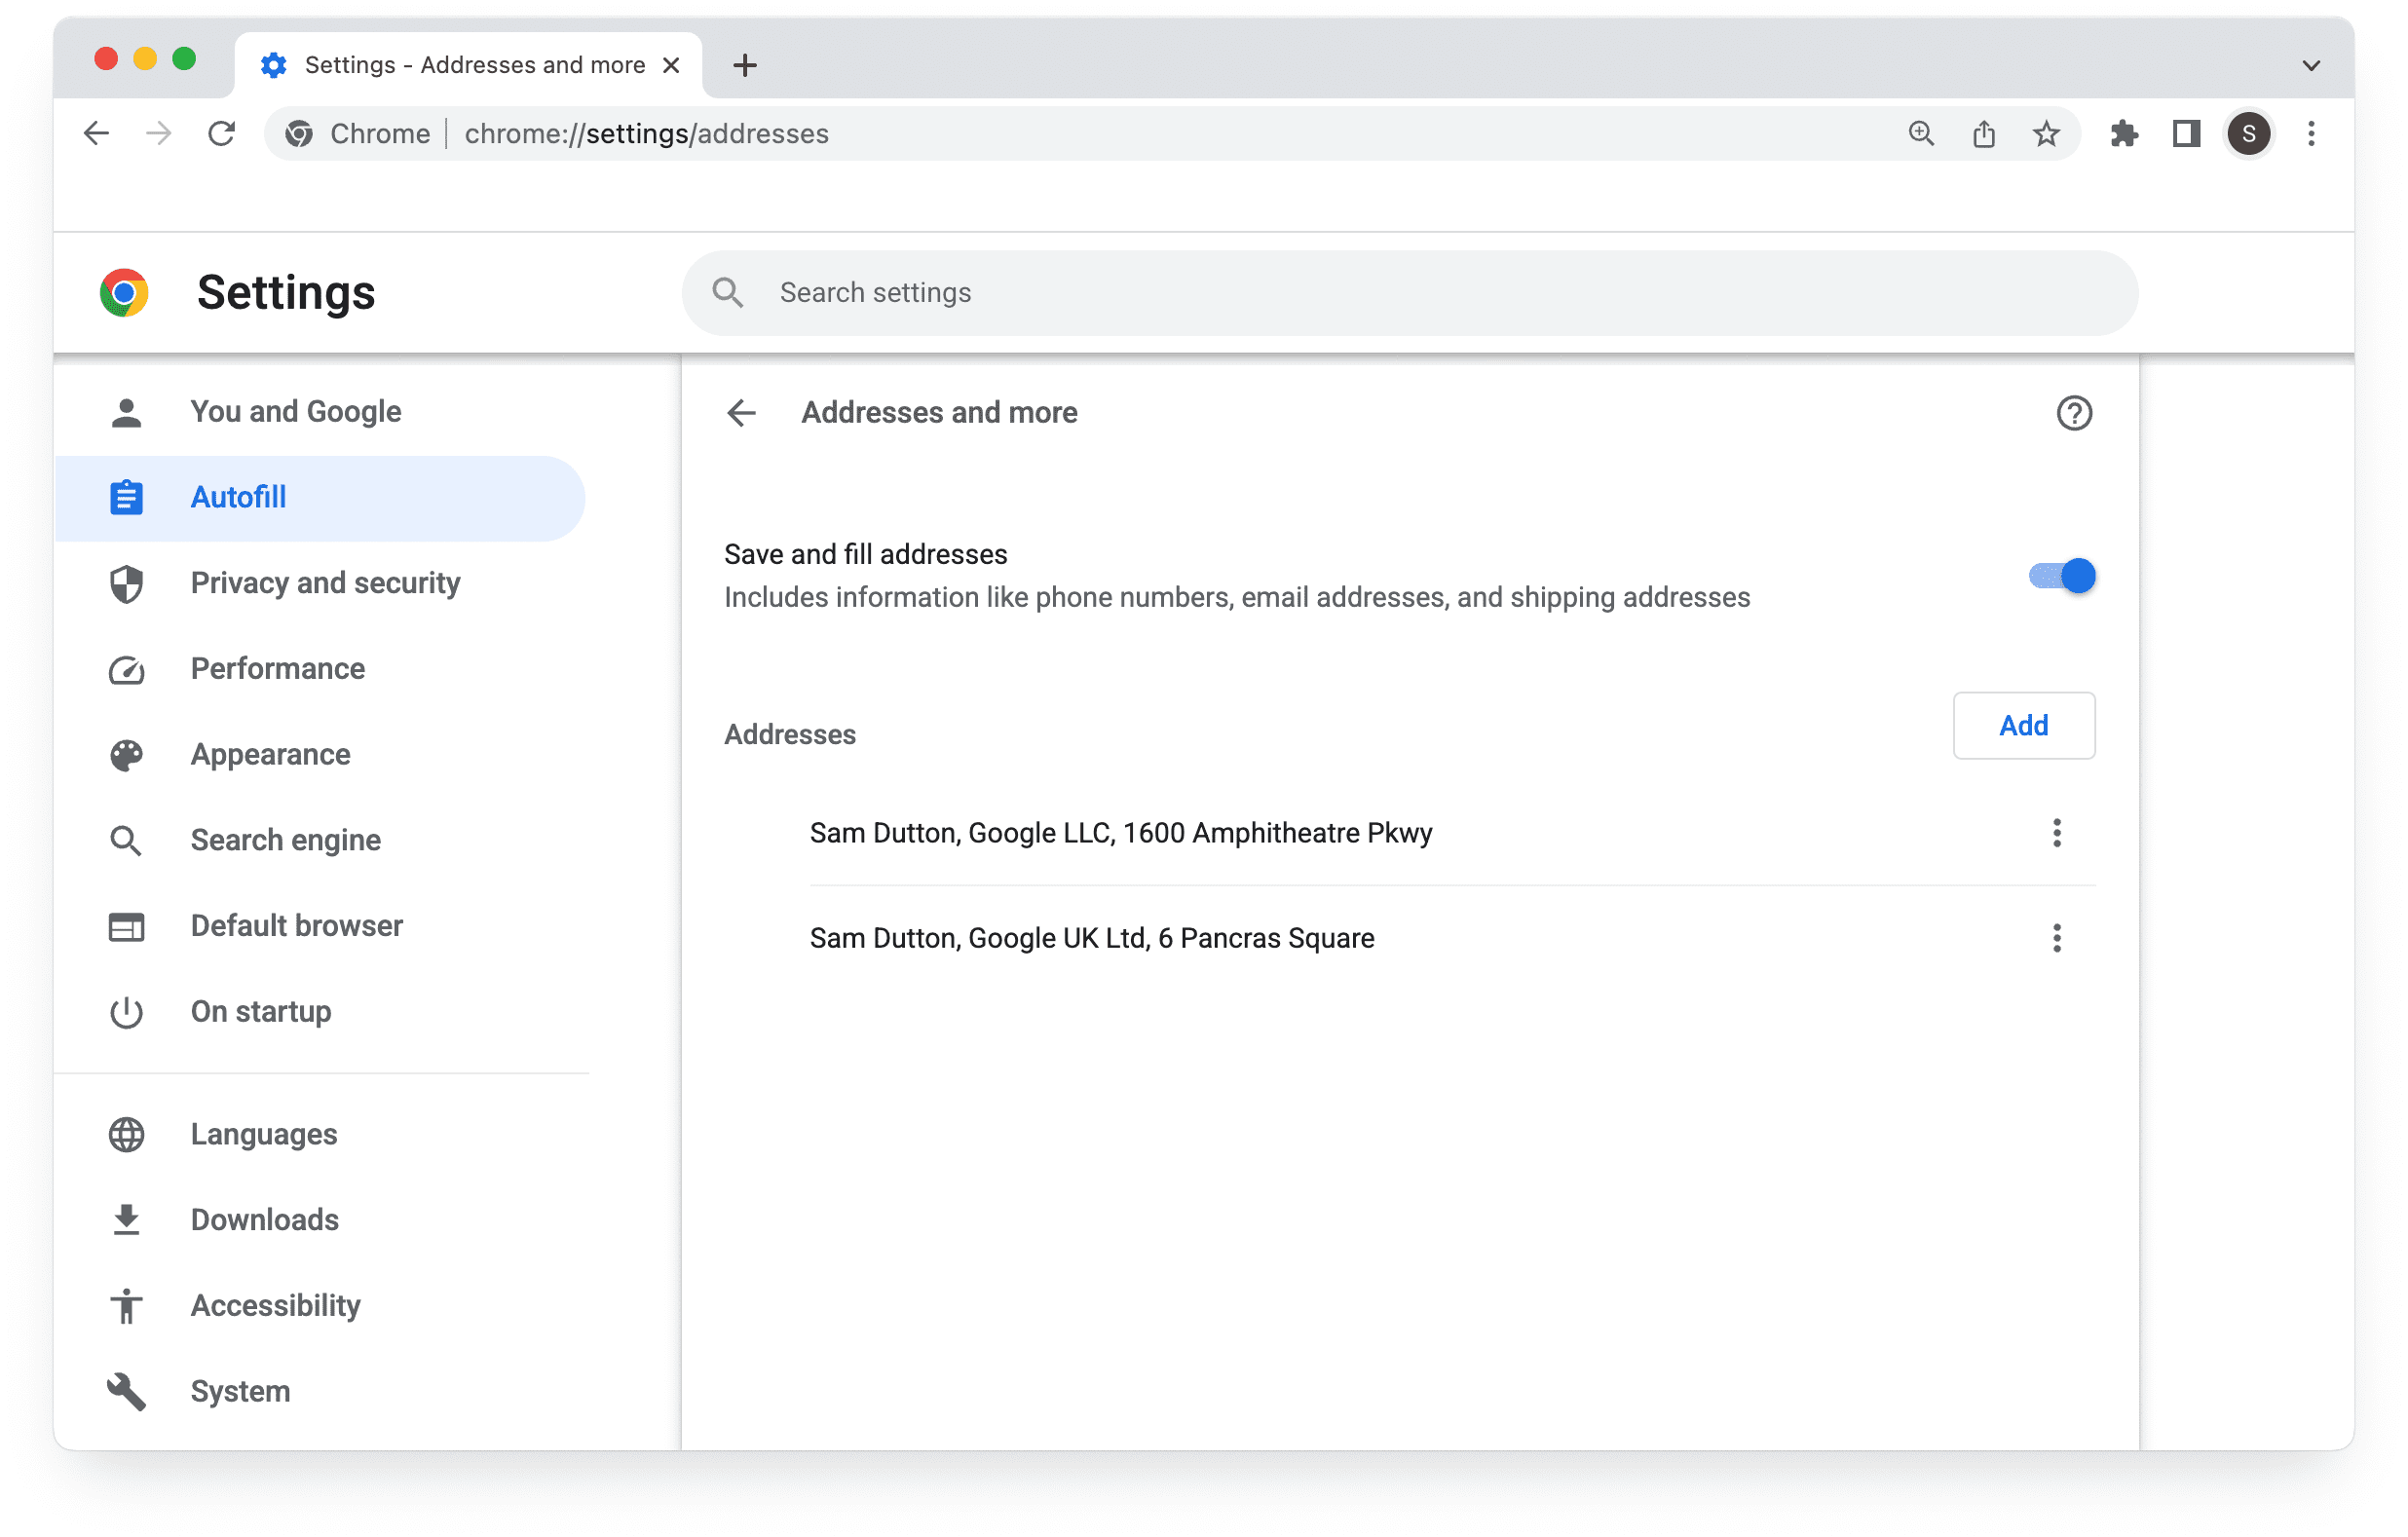 chrome://settings/addresses page, showing two sample addresses